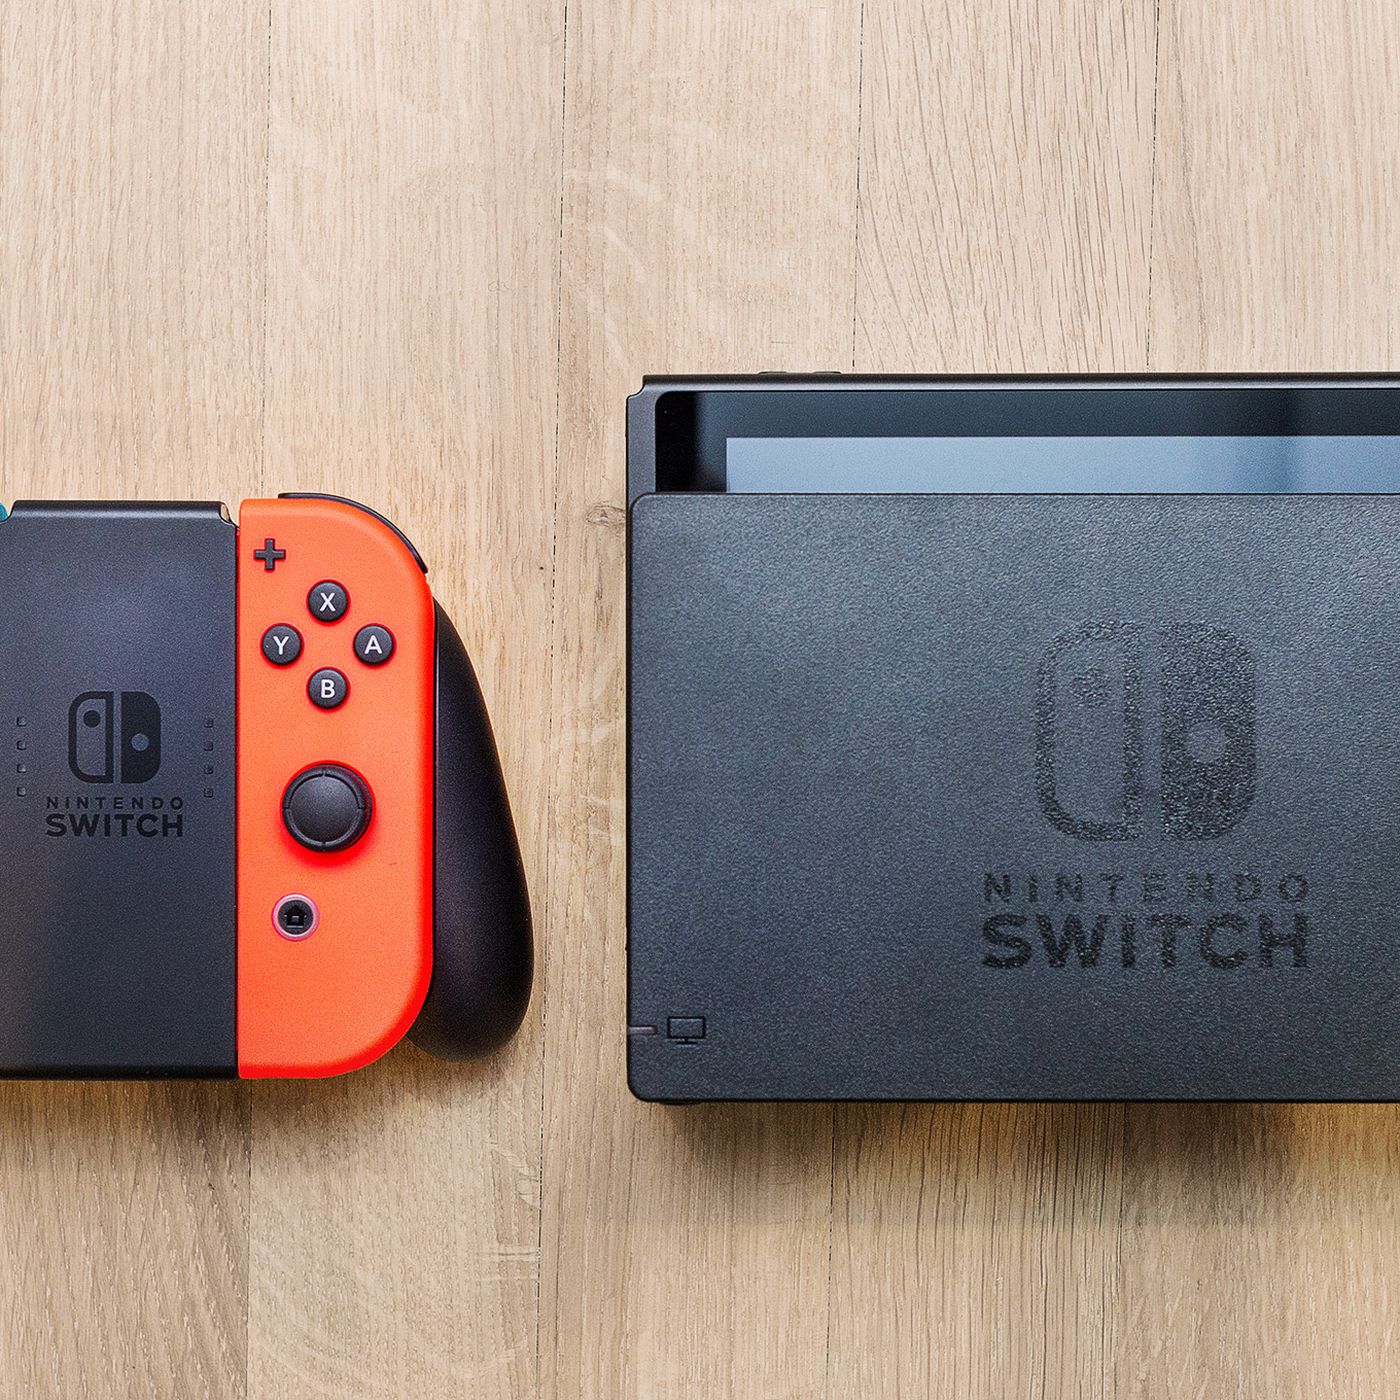 Nintendo Exchanging Switch Consoles To New Model With Better